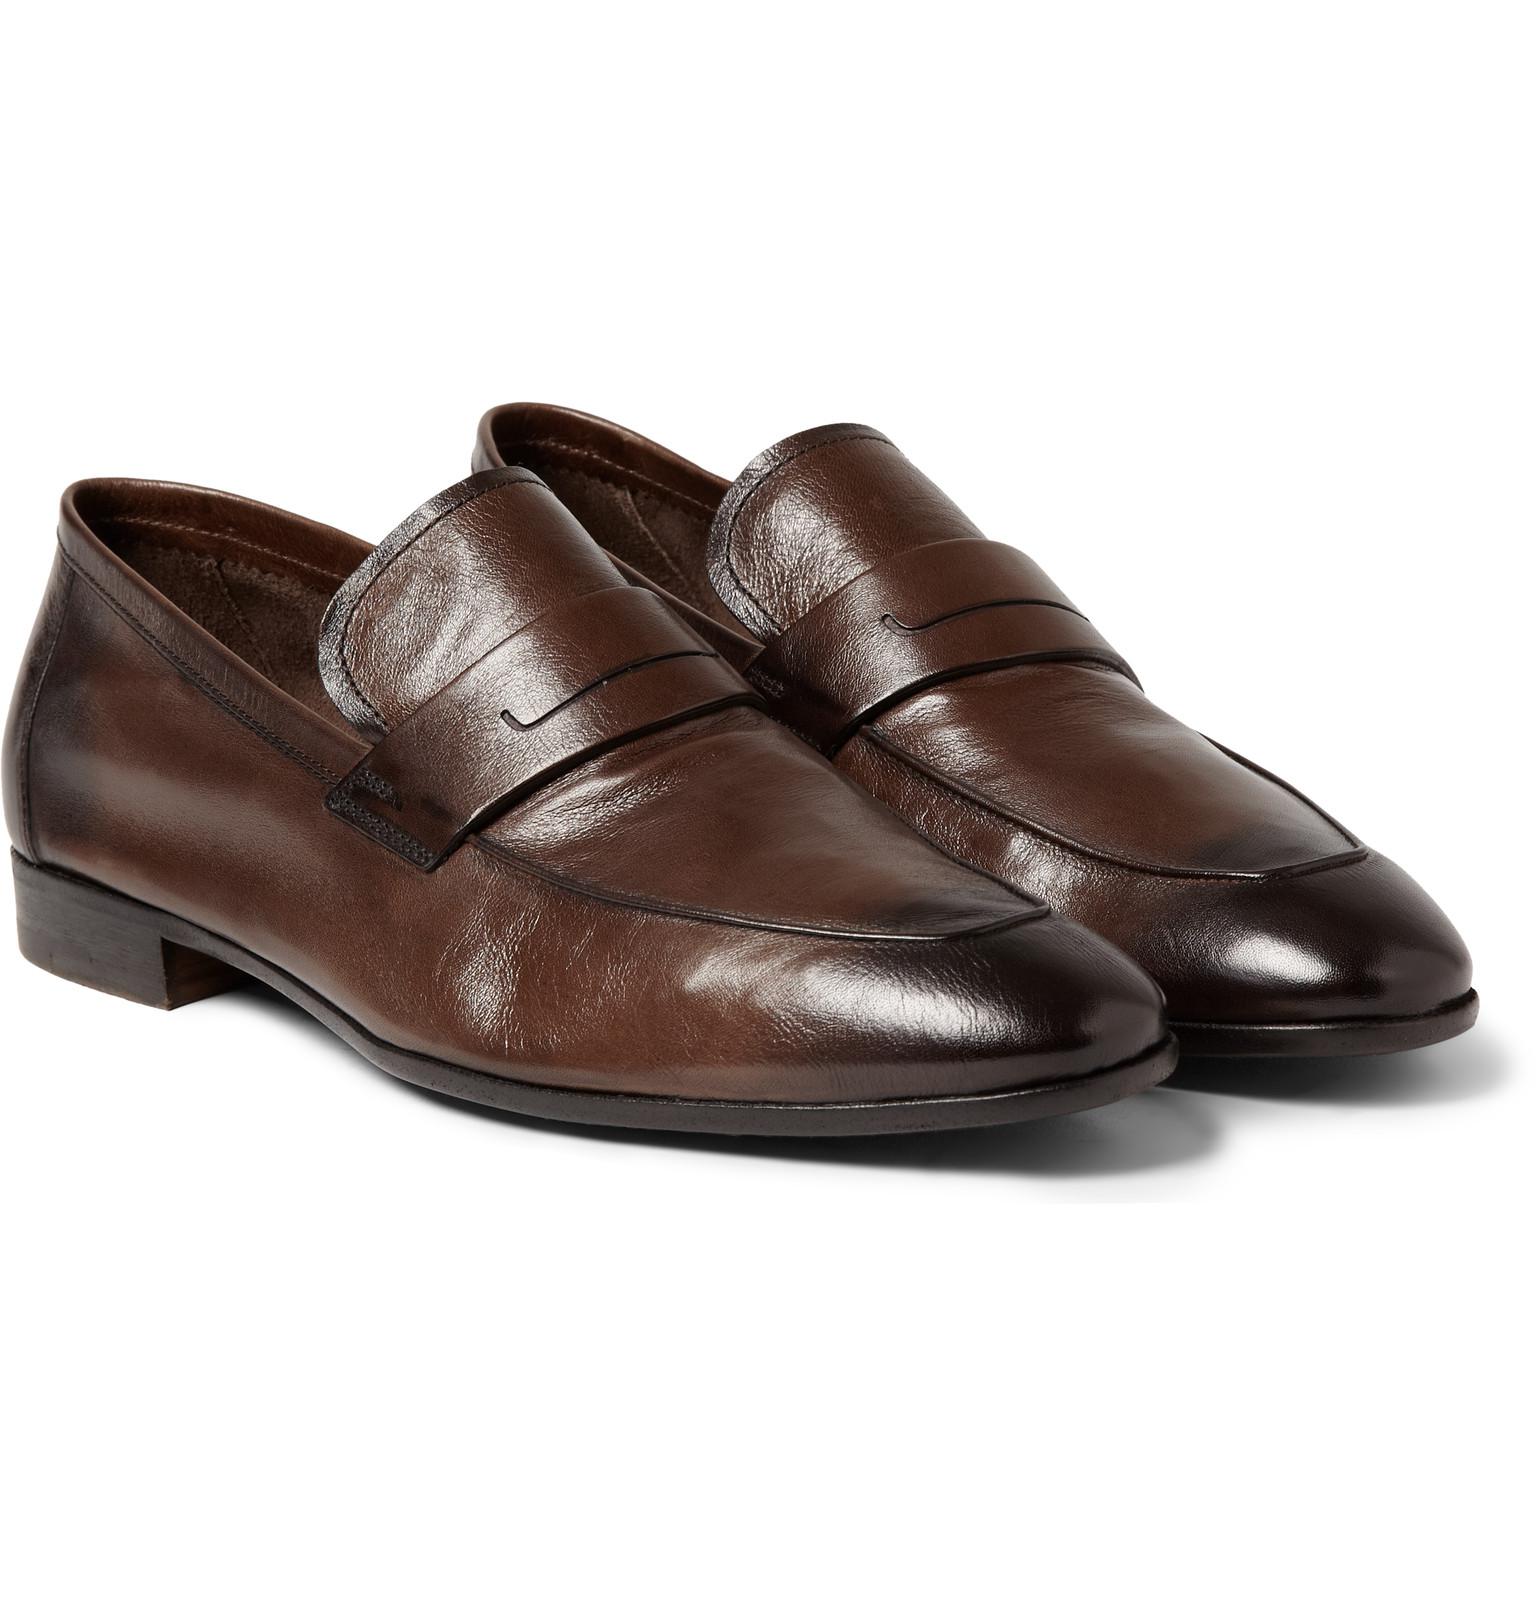 Berluti Lorenzo Leather Loafers in Brown for Men - Lyst